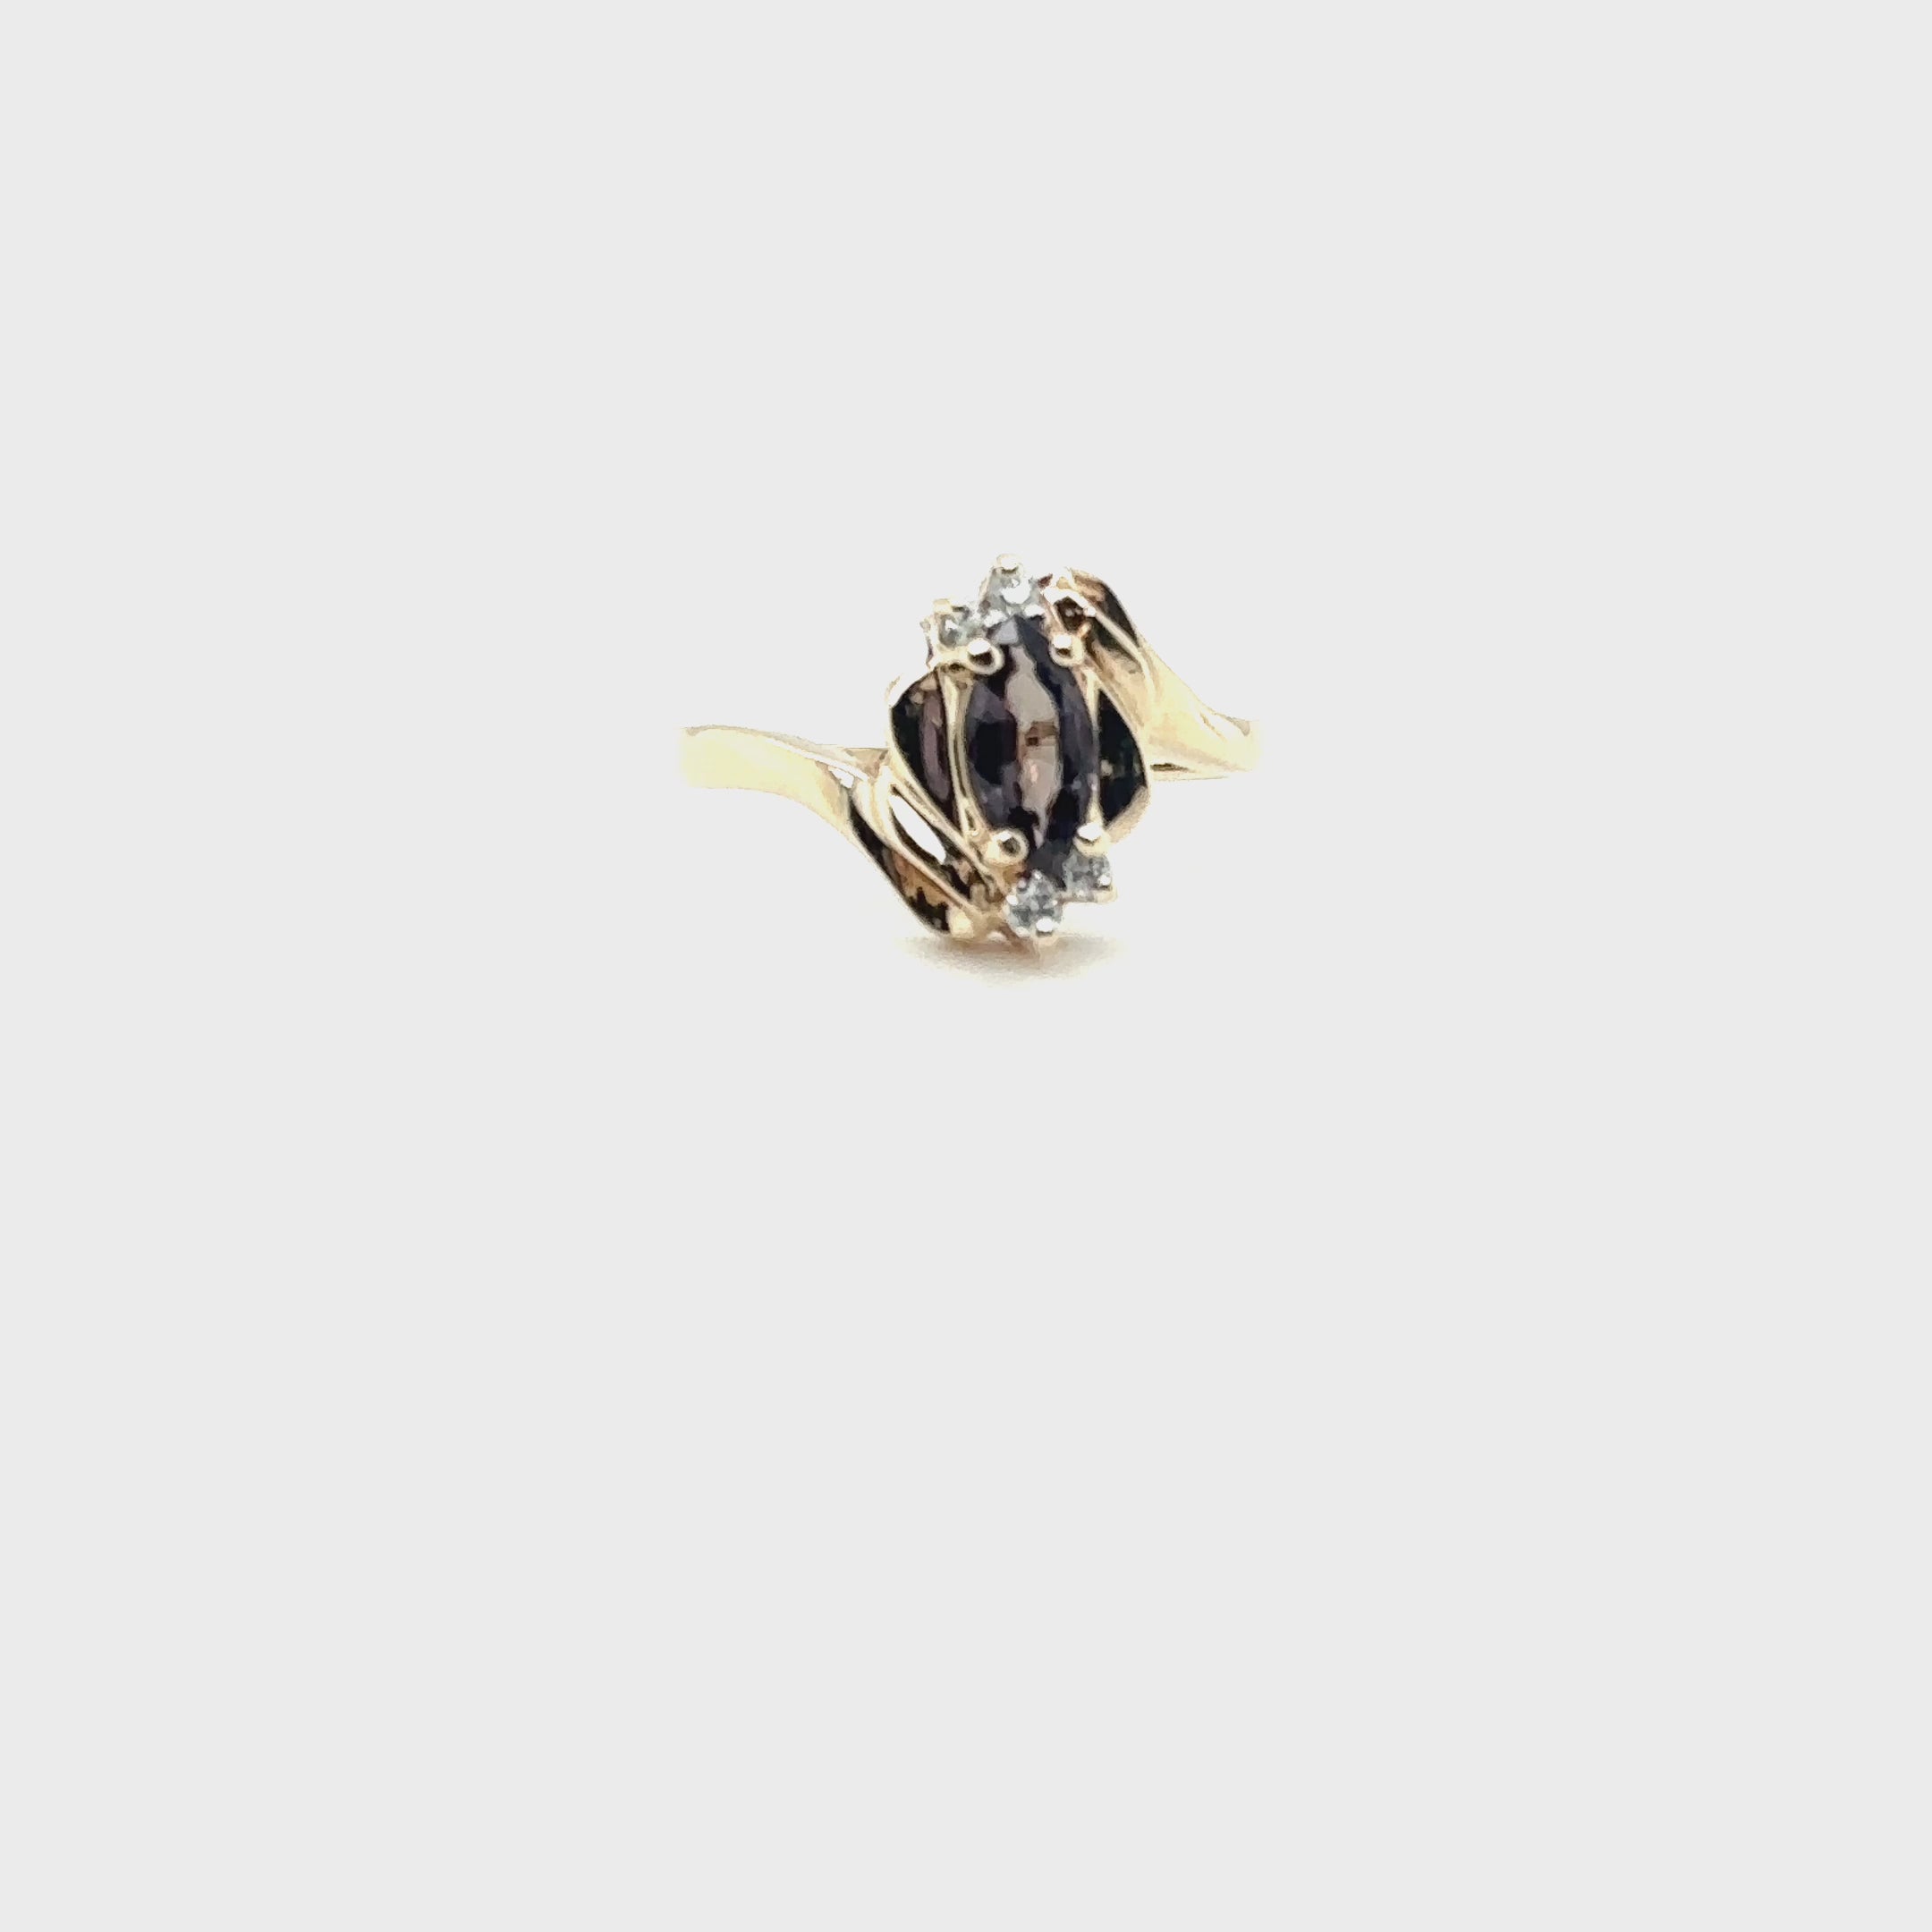 Natural Spinel & Diamond Ring 10K Solid Gold .58tcw Gemstone Ring Statement Ring June Birthstone Ring Fine Estate Jewelry Women's Ring